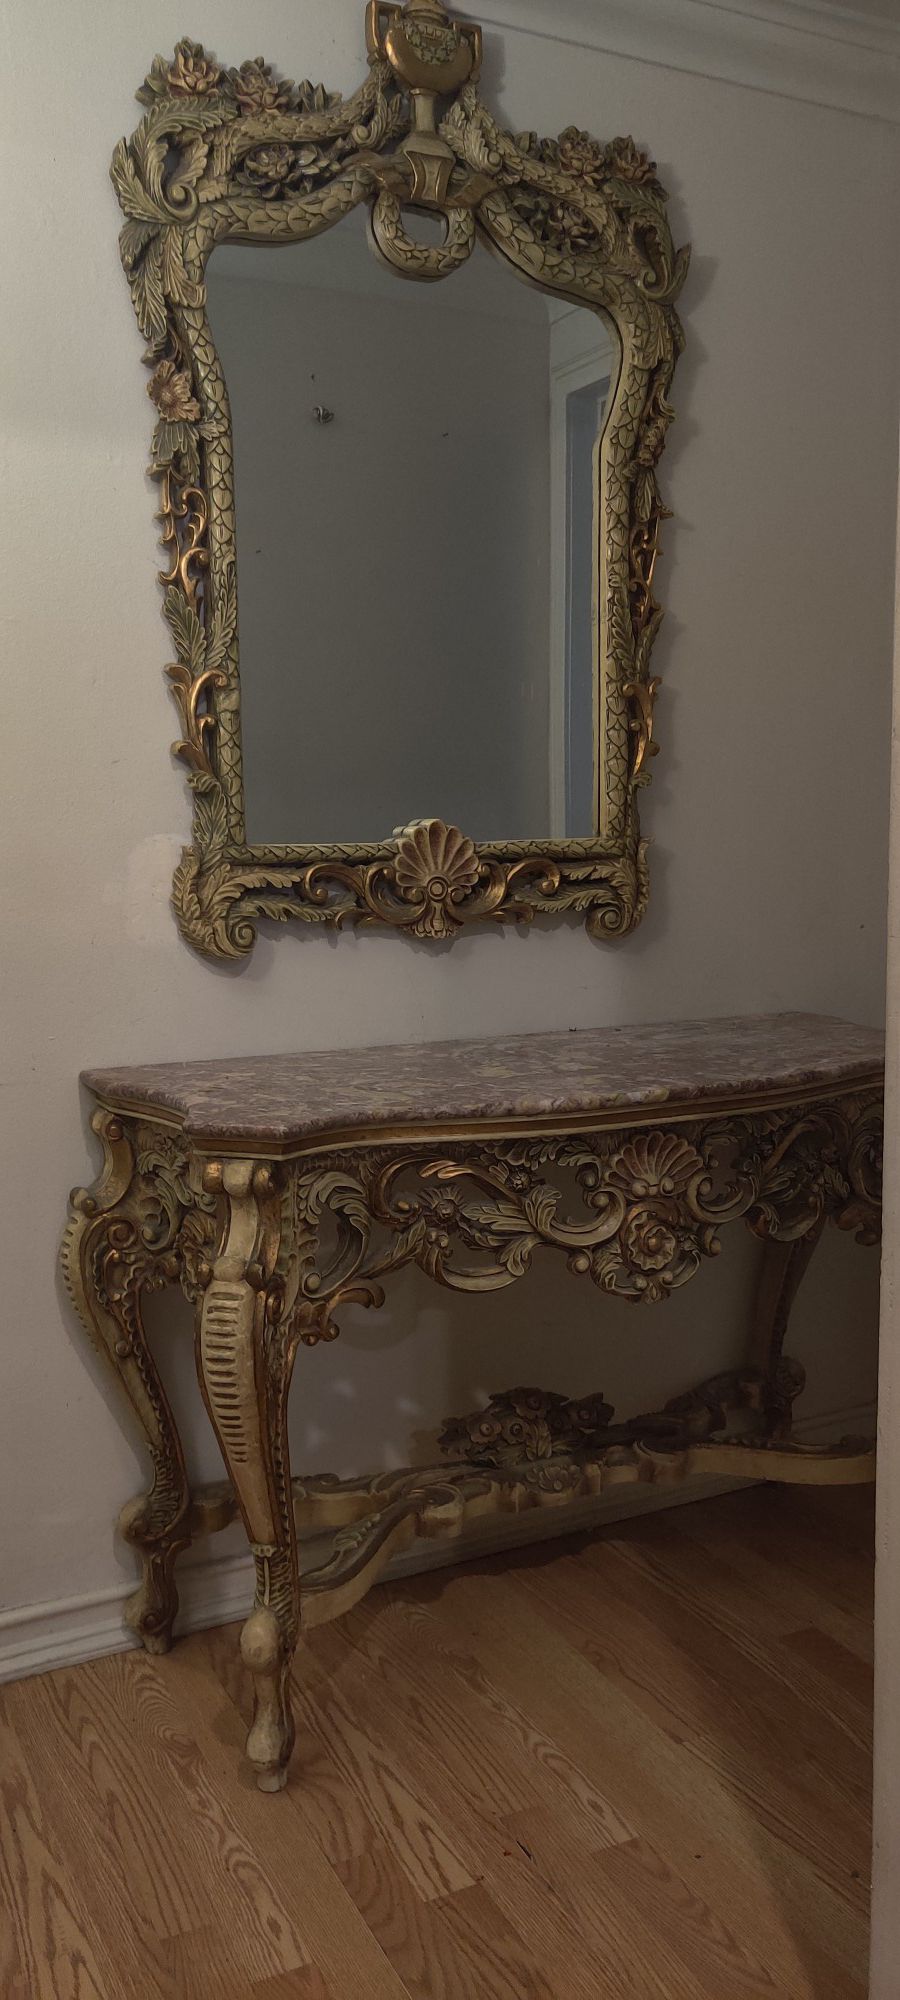 Table color: gold with marble for top comes with mirror. Beautiful designs